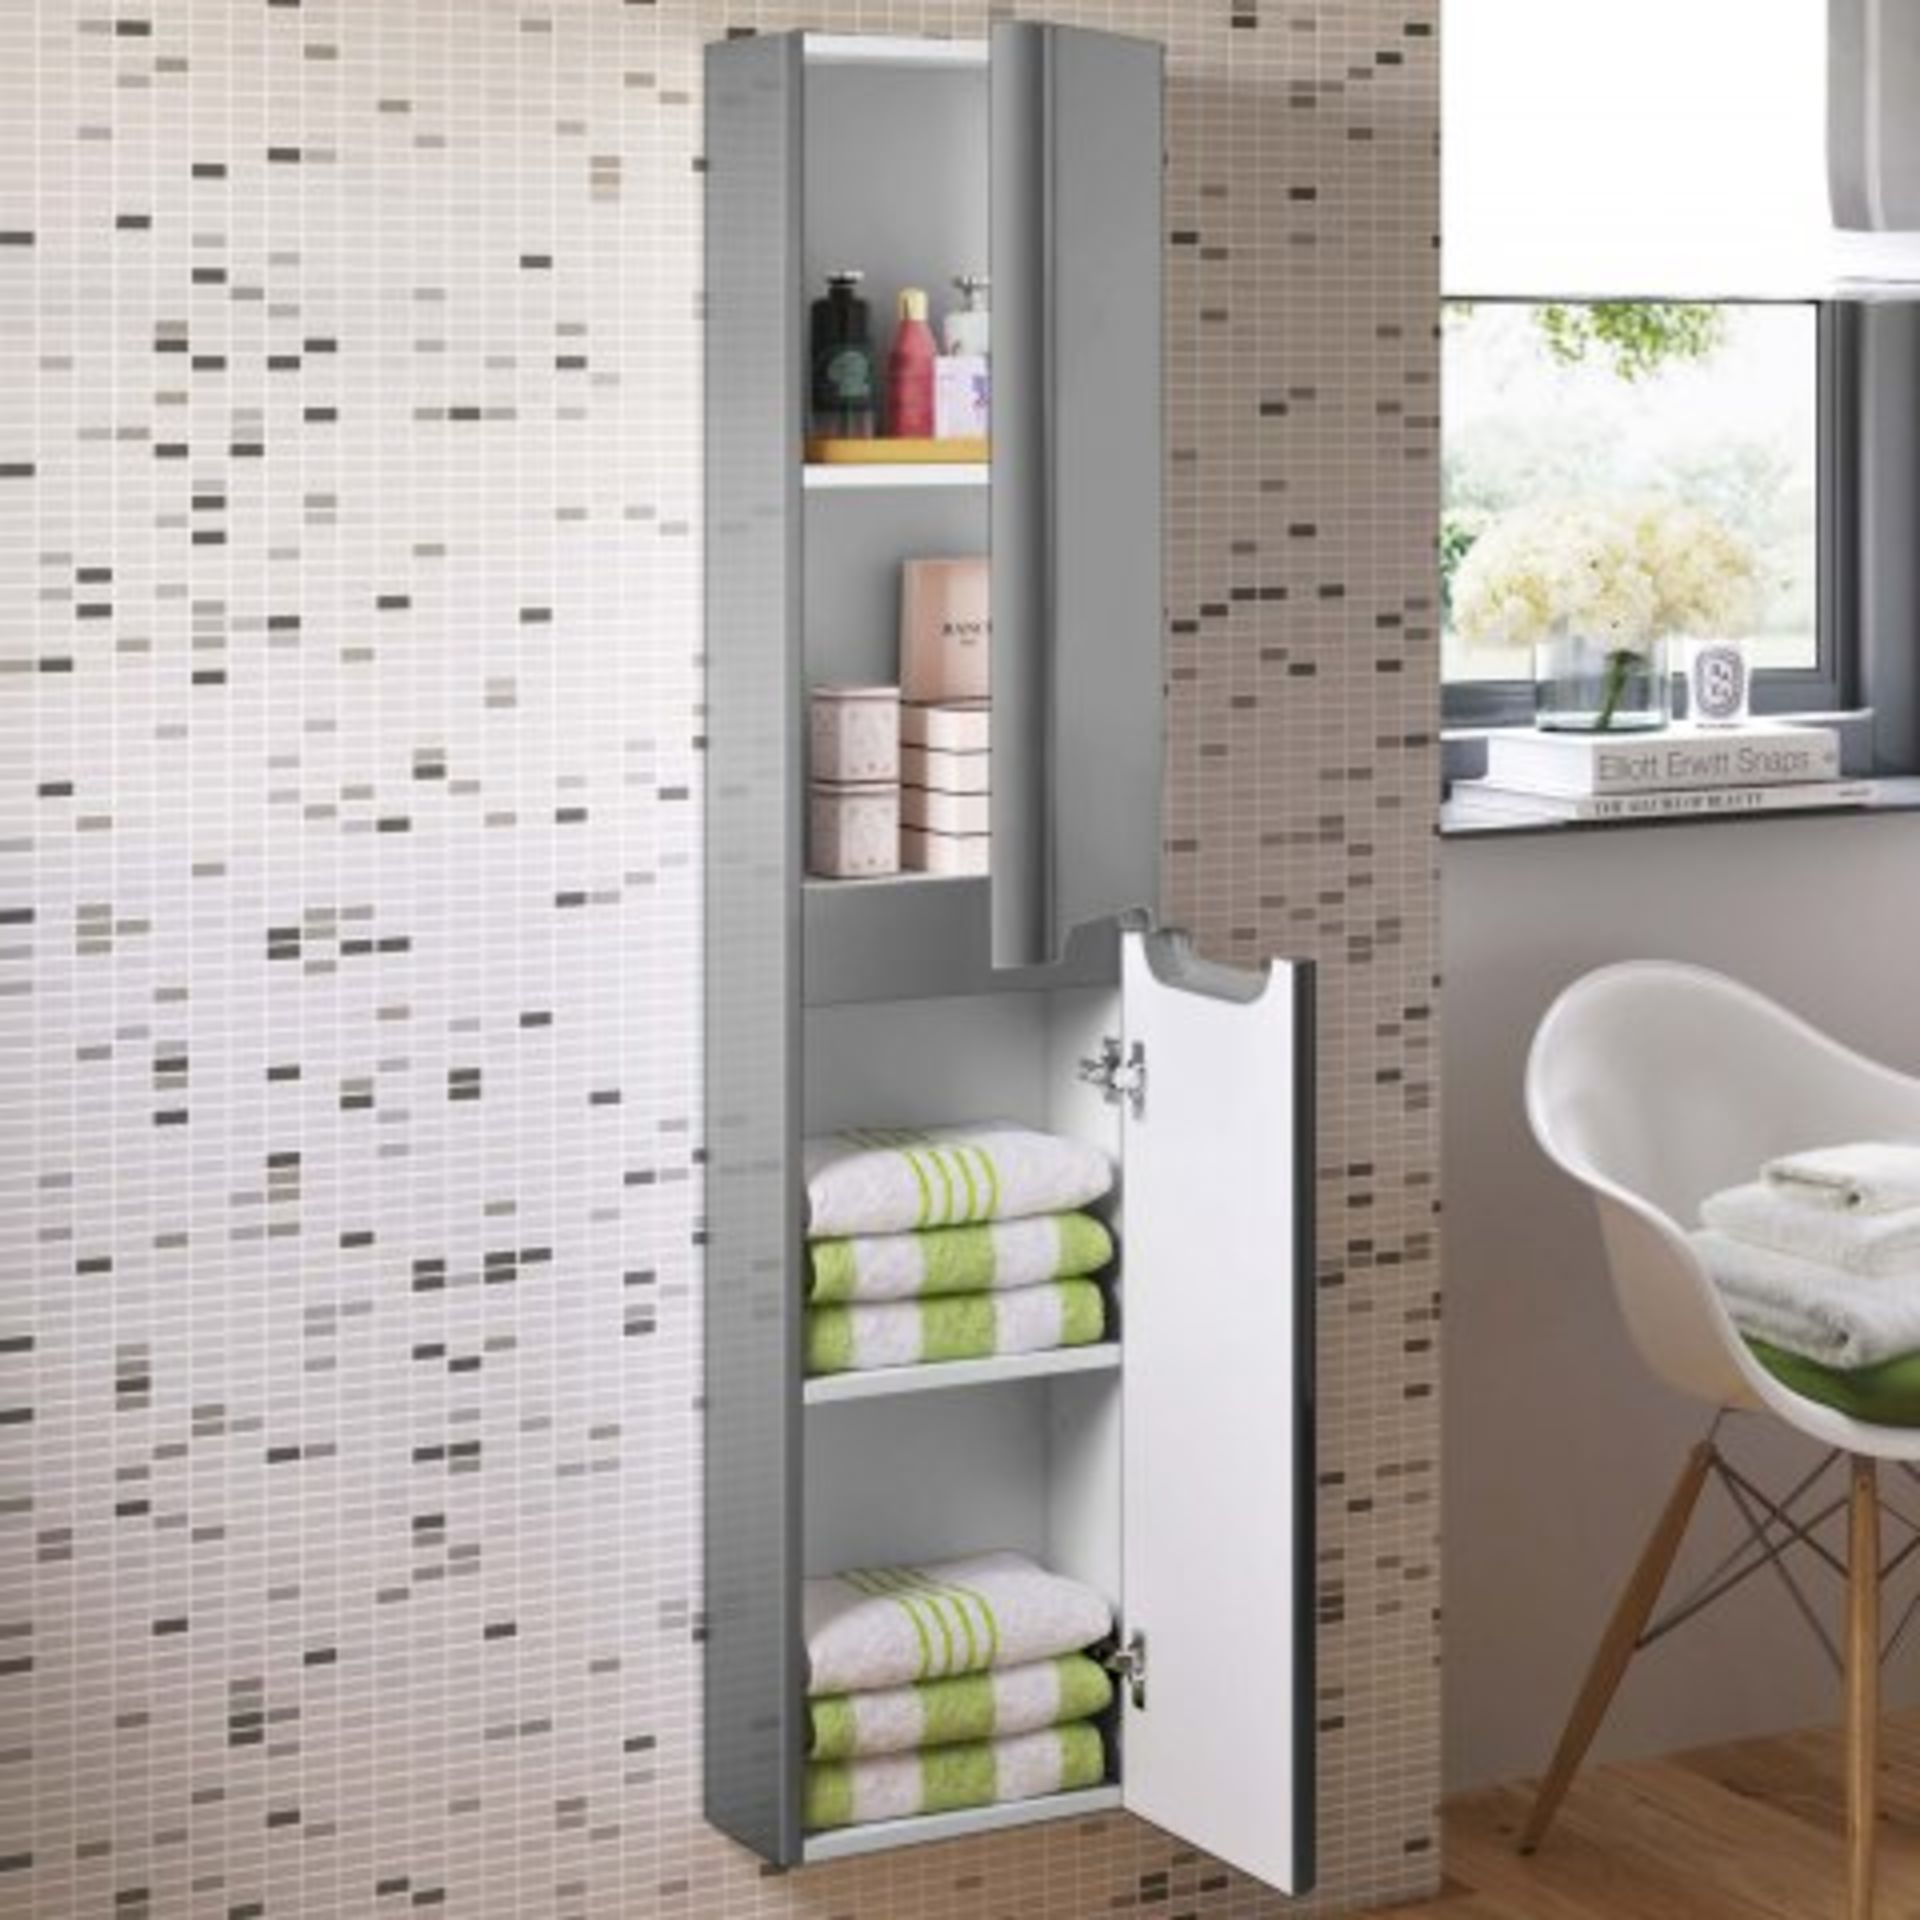 (SKU40) 1400mm Tuscany Gloss Grey Tall Storage Cabinet - Wall Hung. RRP £299.99. With its - Image 2 of 3